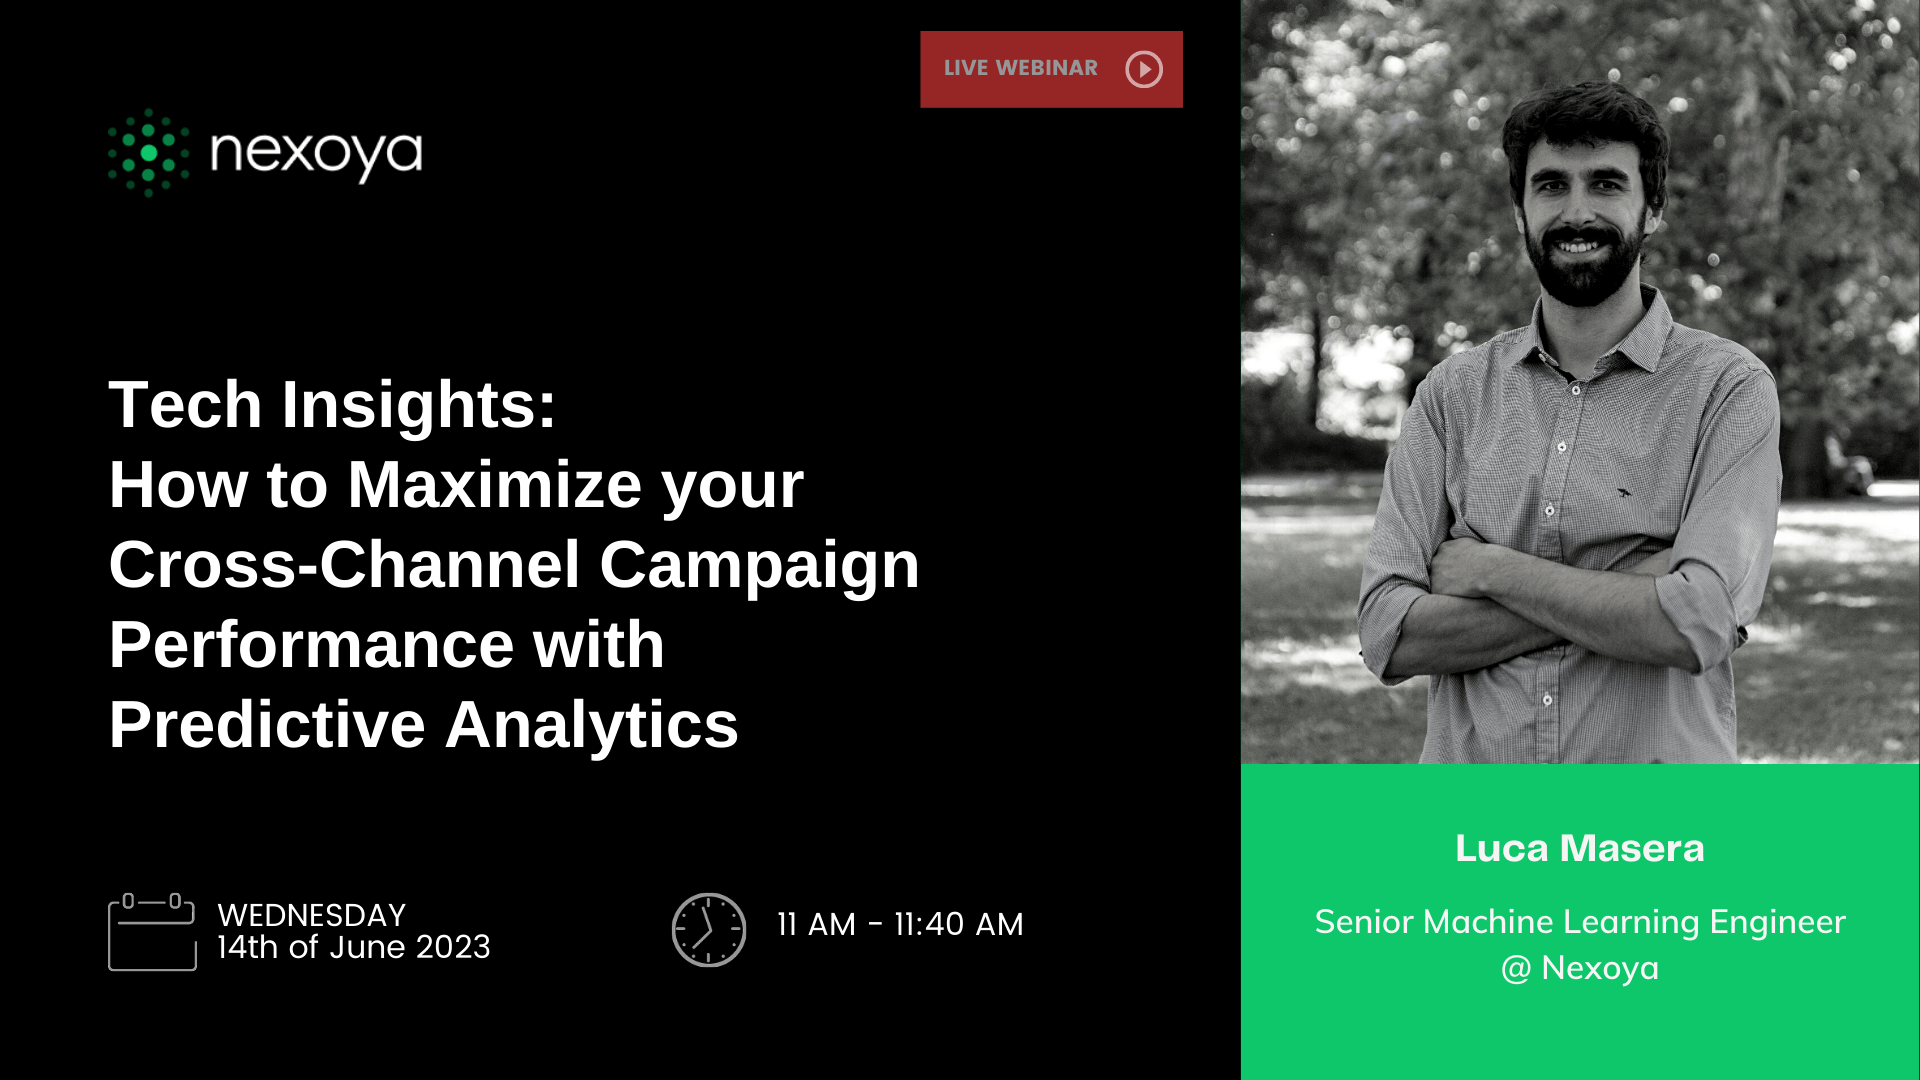 Webinar - Tech Insights: How to Maximize your Cross-Channel Campaign Performance with Predictive Analytics